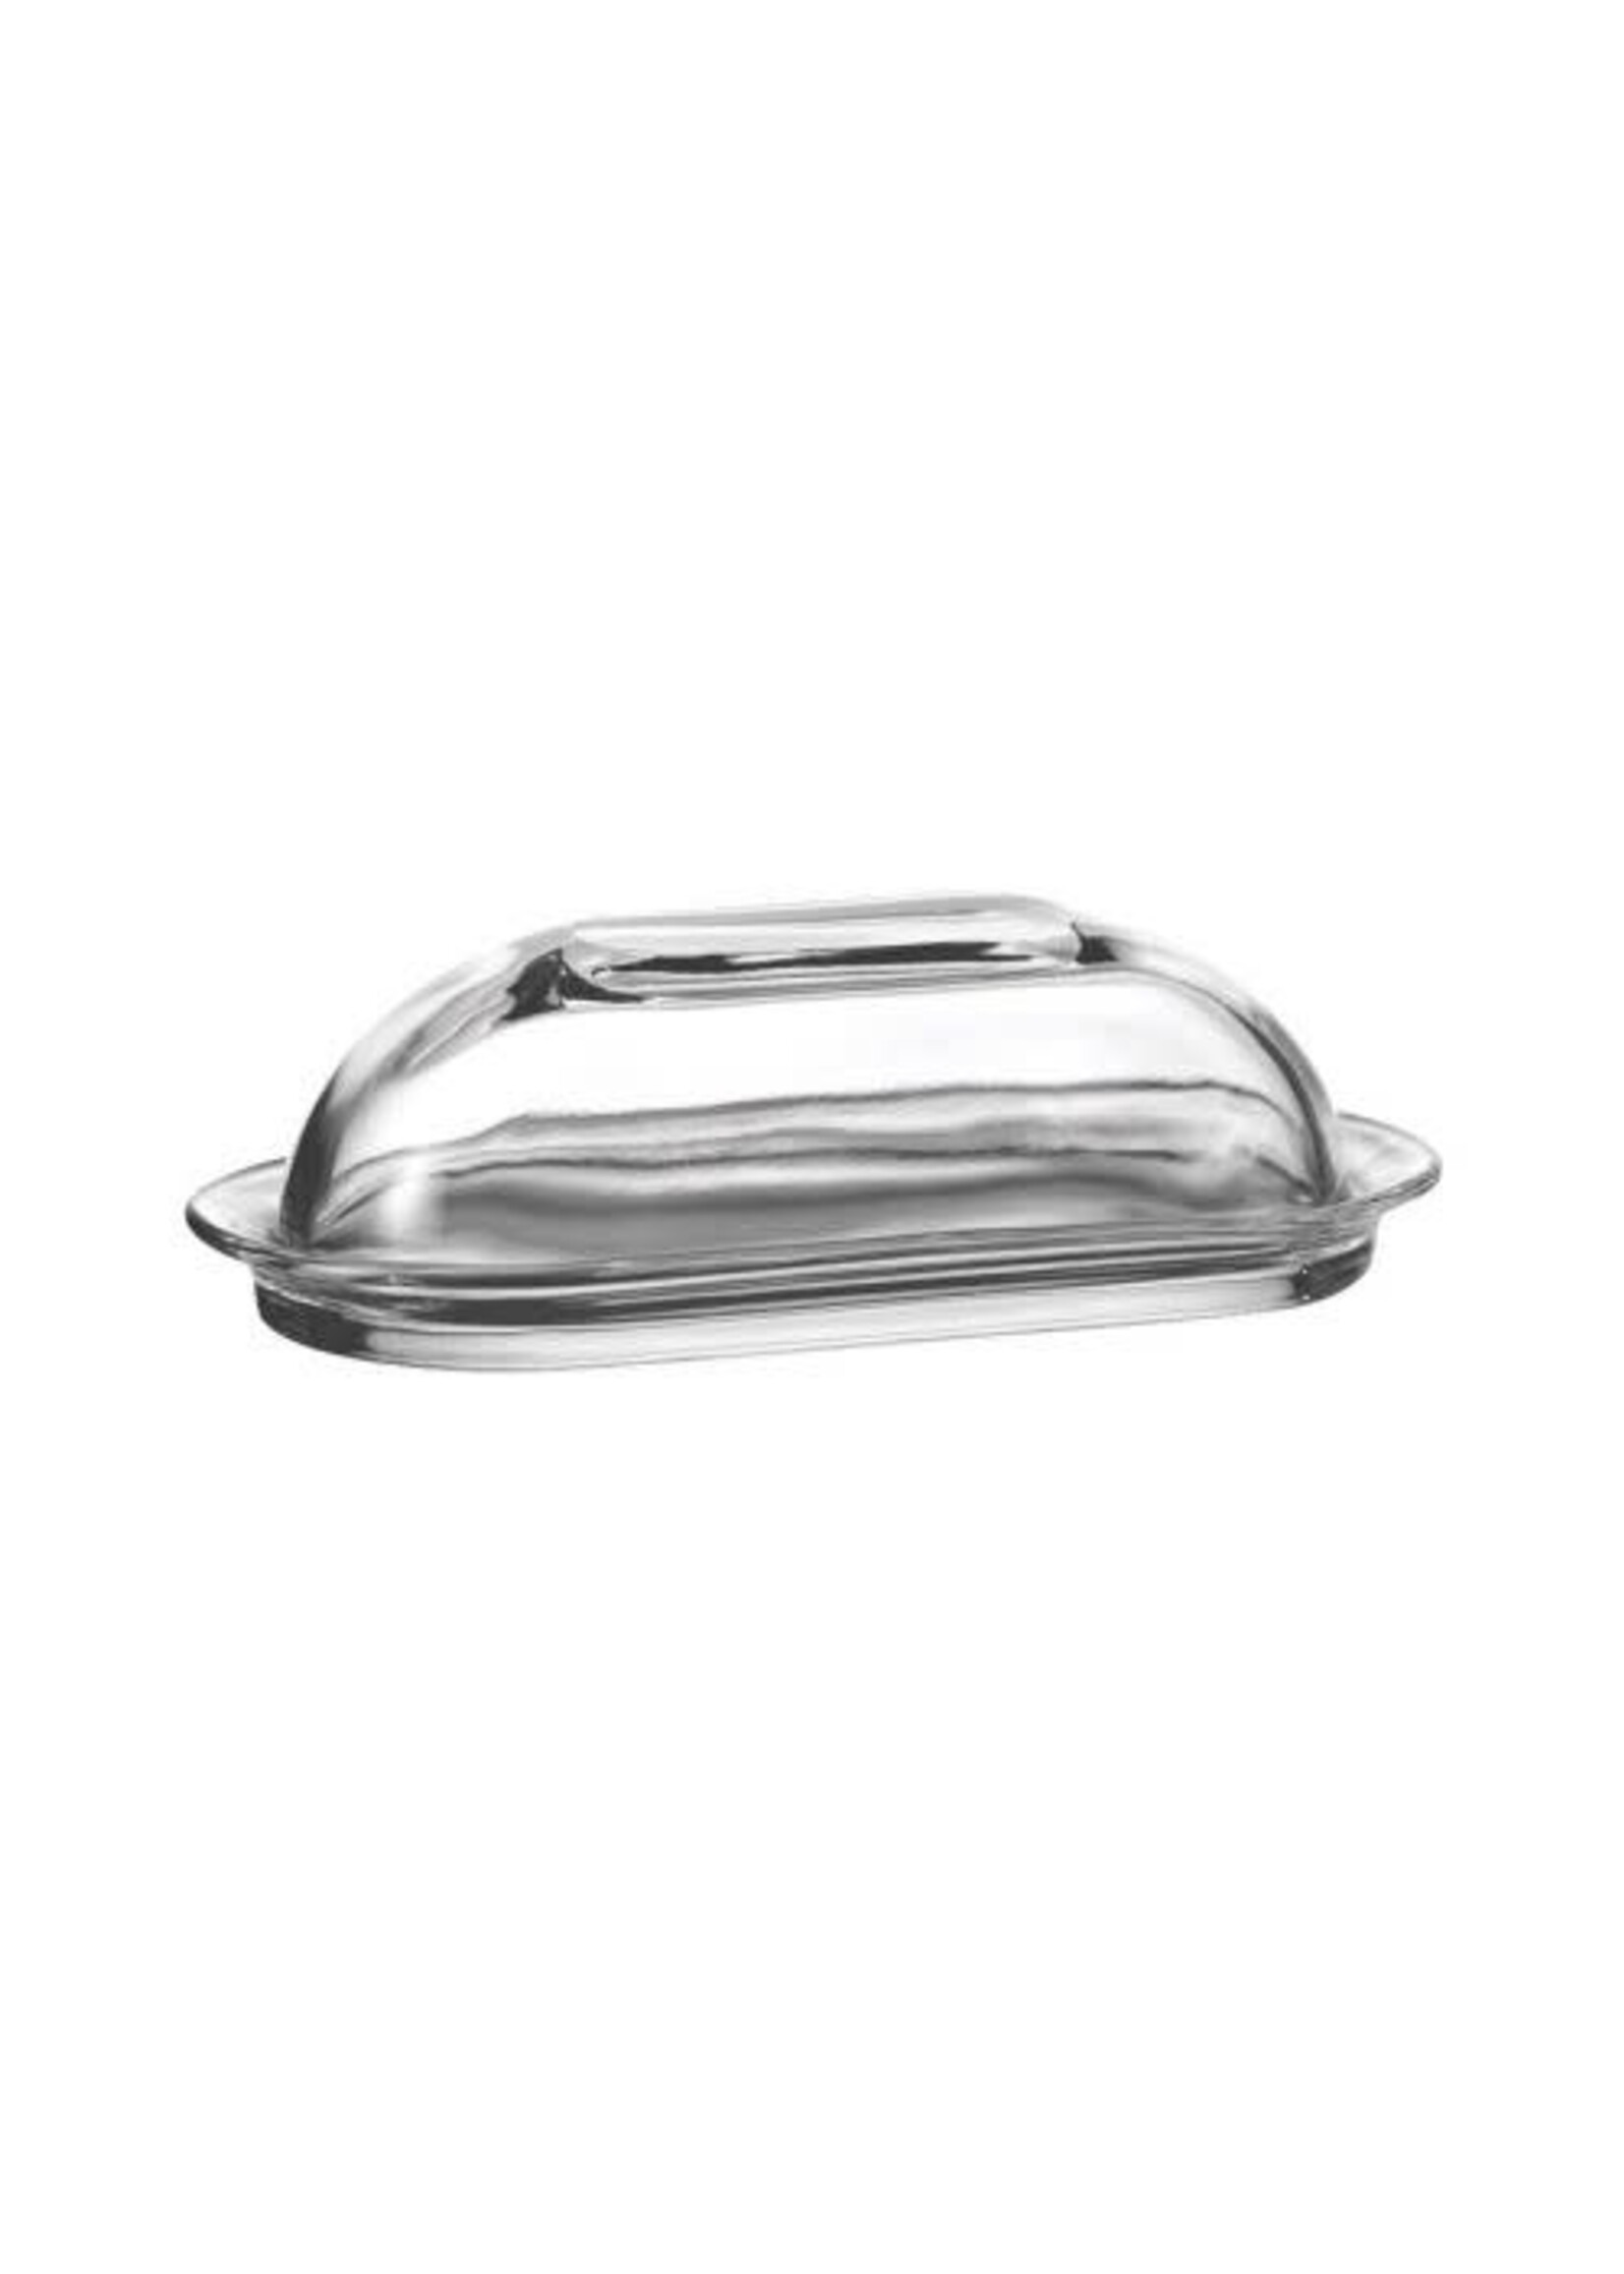 Harold Import Company Inc. Covered Butter Dish